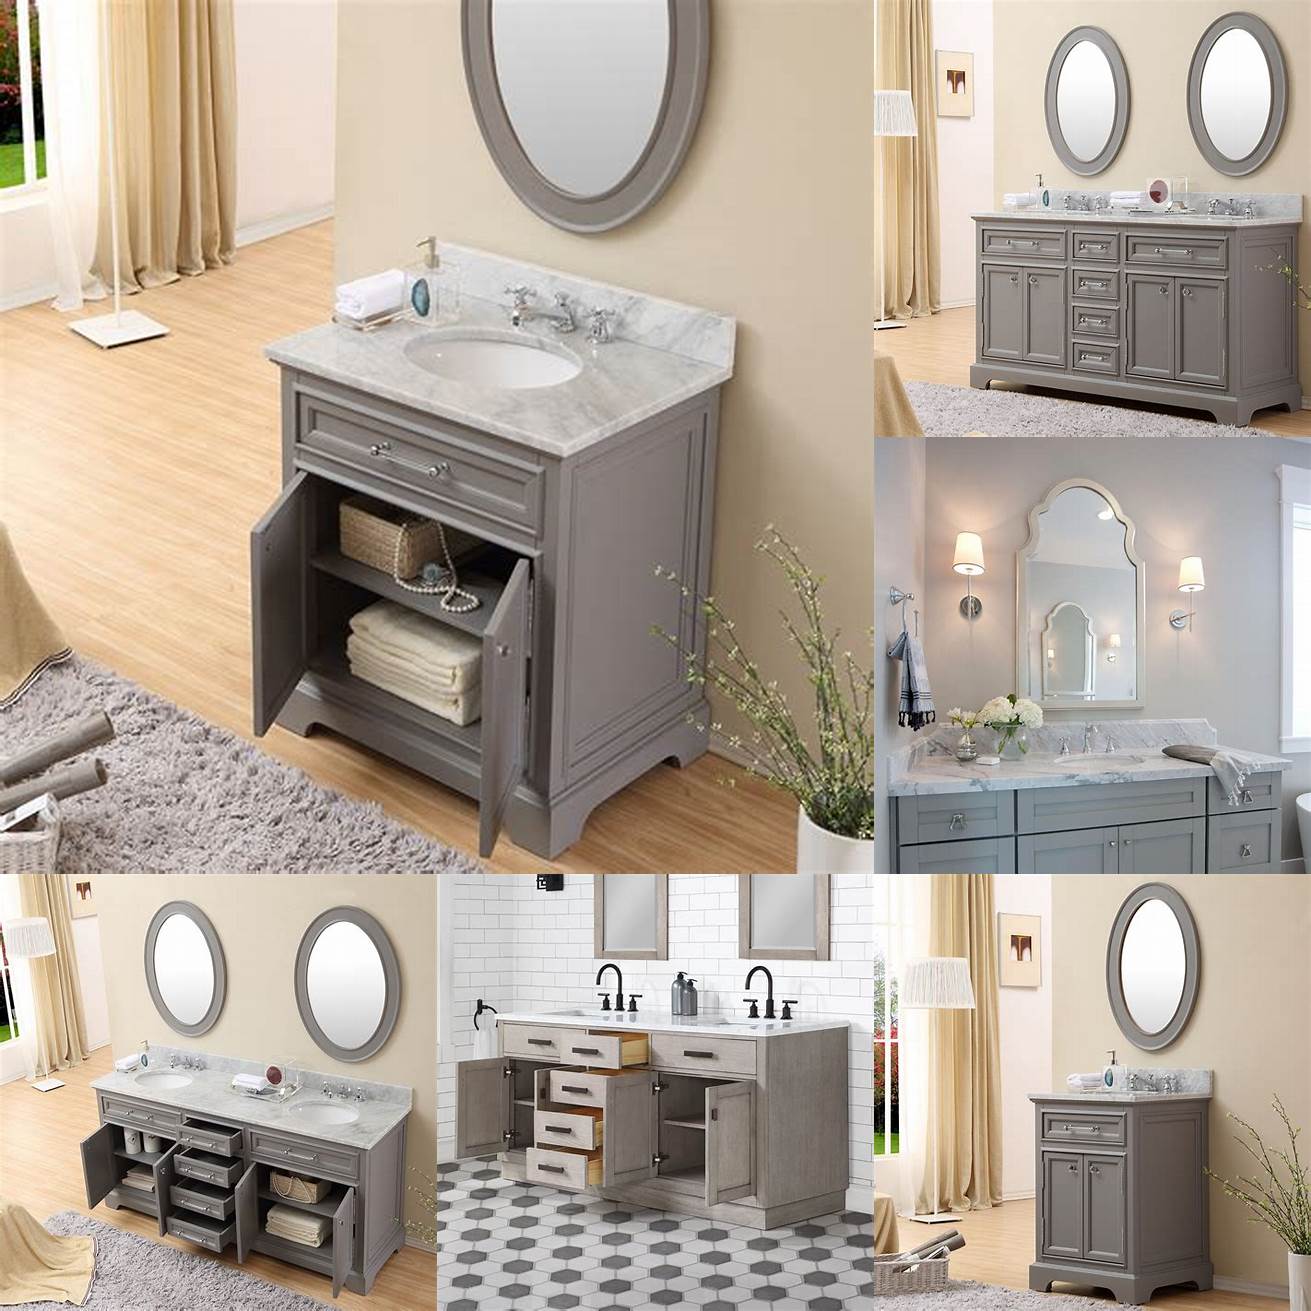 Double vanity with gray finish